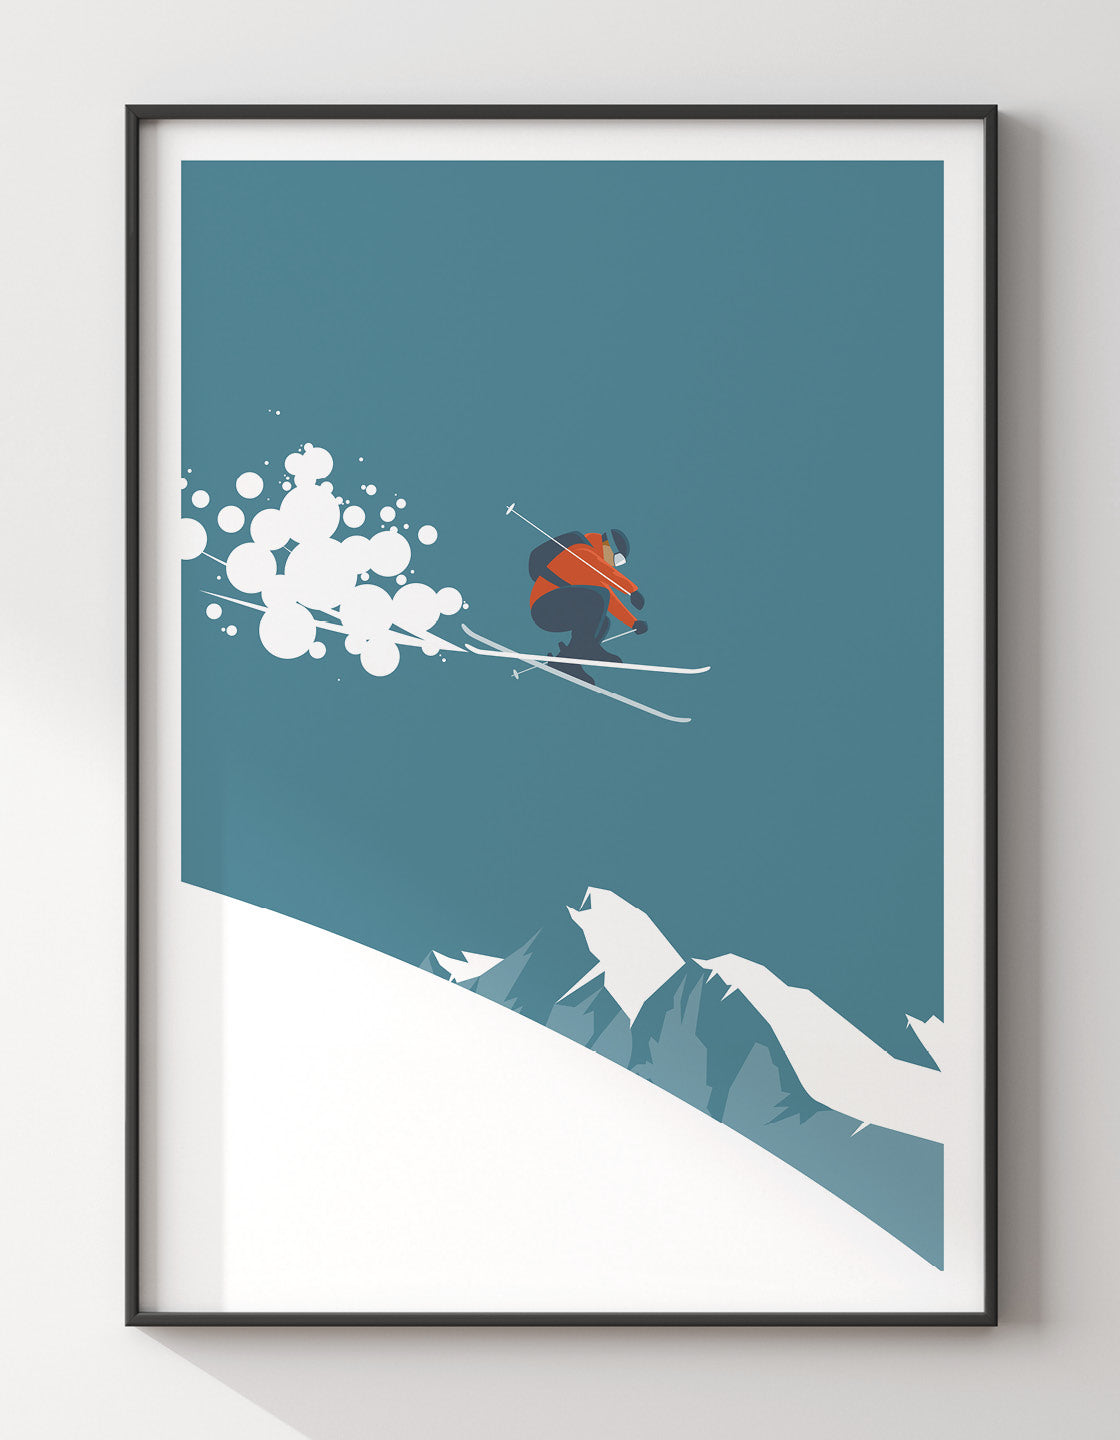 Skier in the air